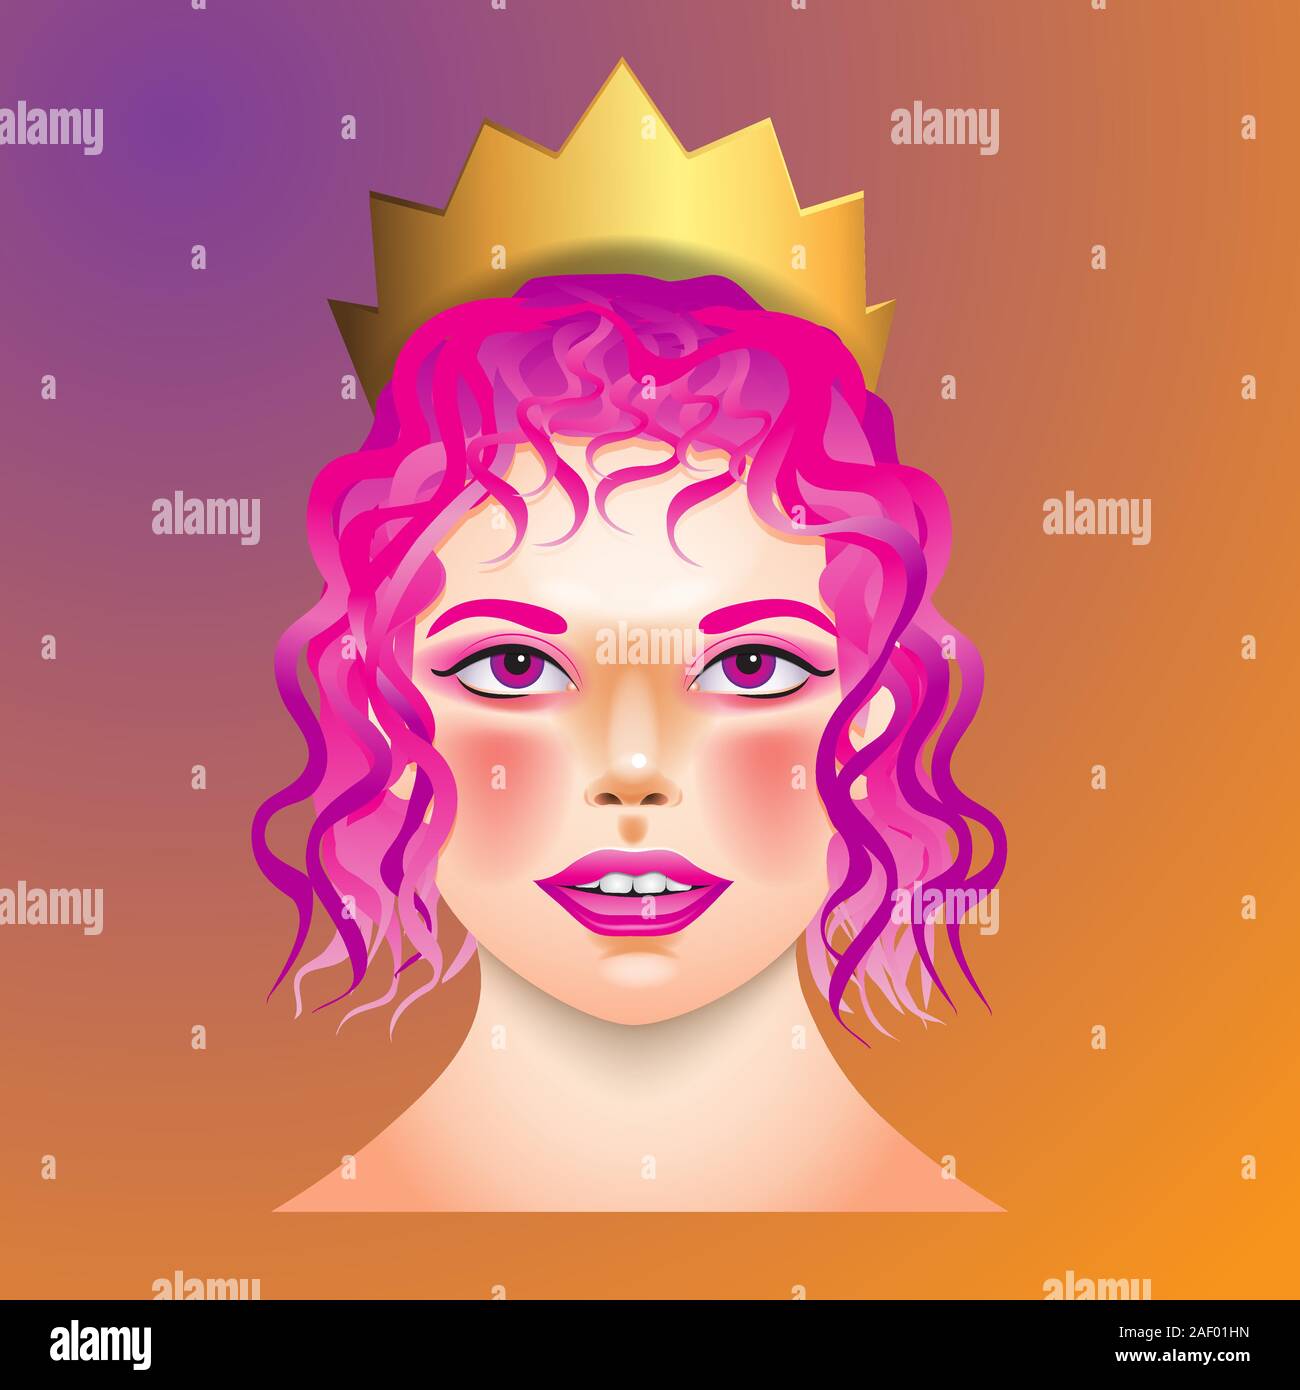 The face of a woman with a crown on her head on an isolated background. Vector image Stock Vector